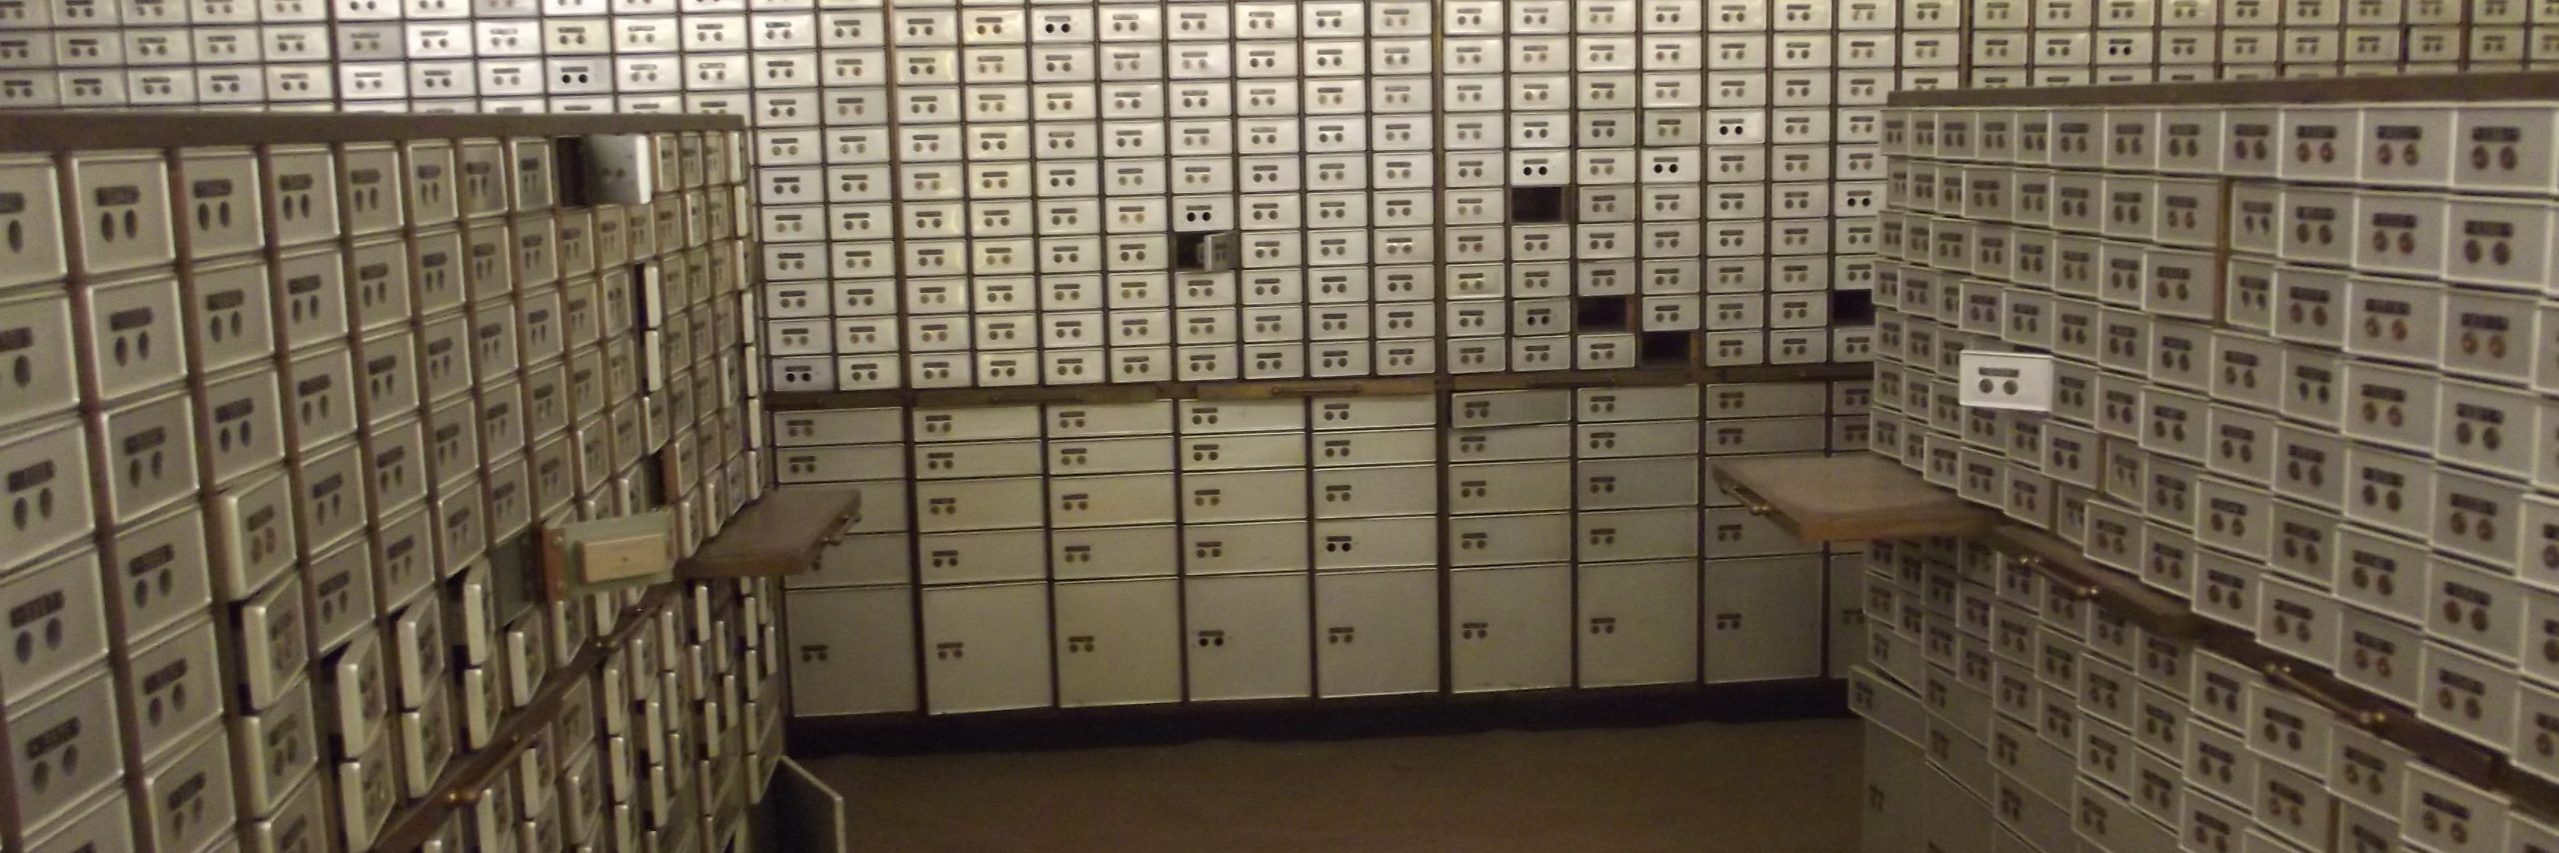 A bank vault with safety deposit boxes